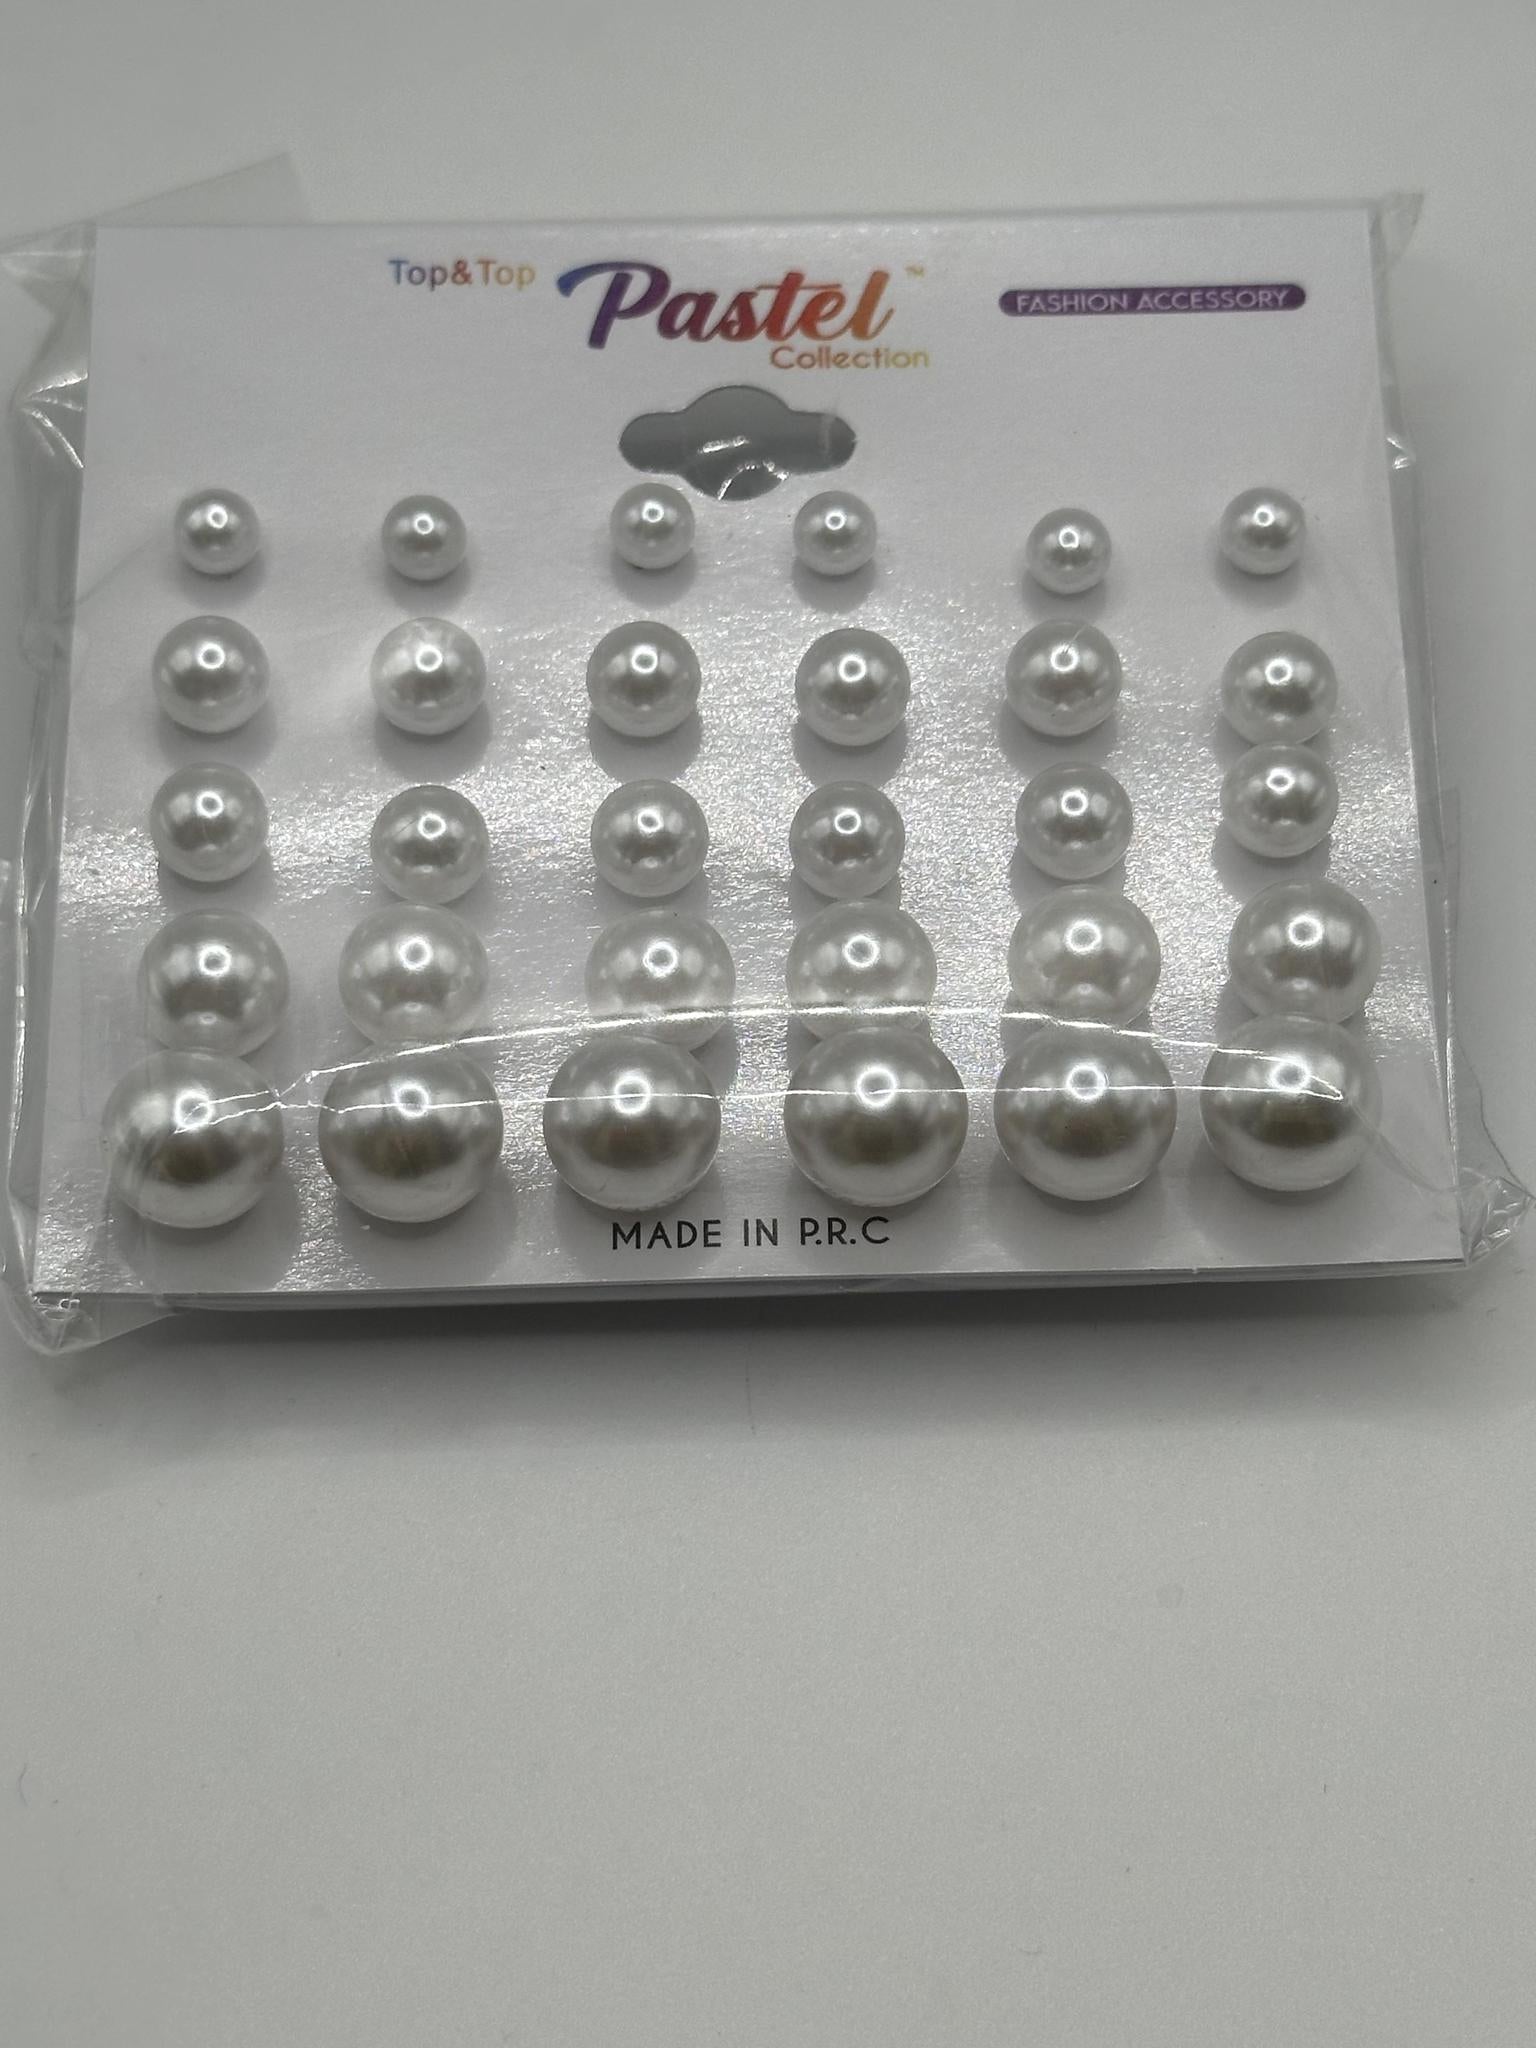 TOP & TOP PASTEL COLLECTION ASSORTED SIZES WHITE PEARL EARRINGS (15 PAIRS)